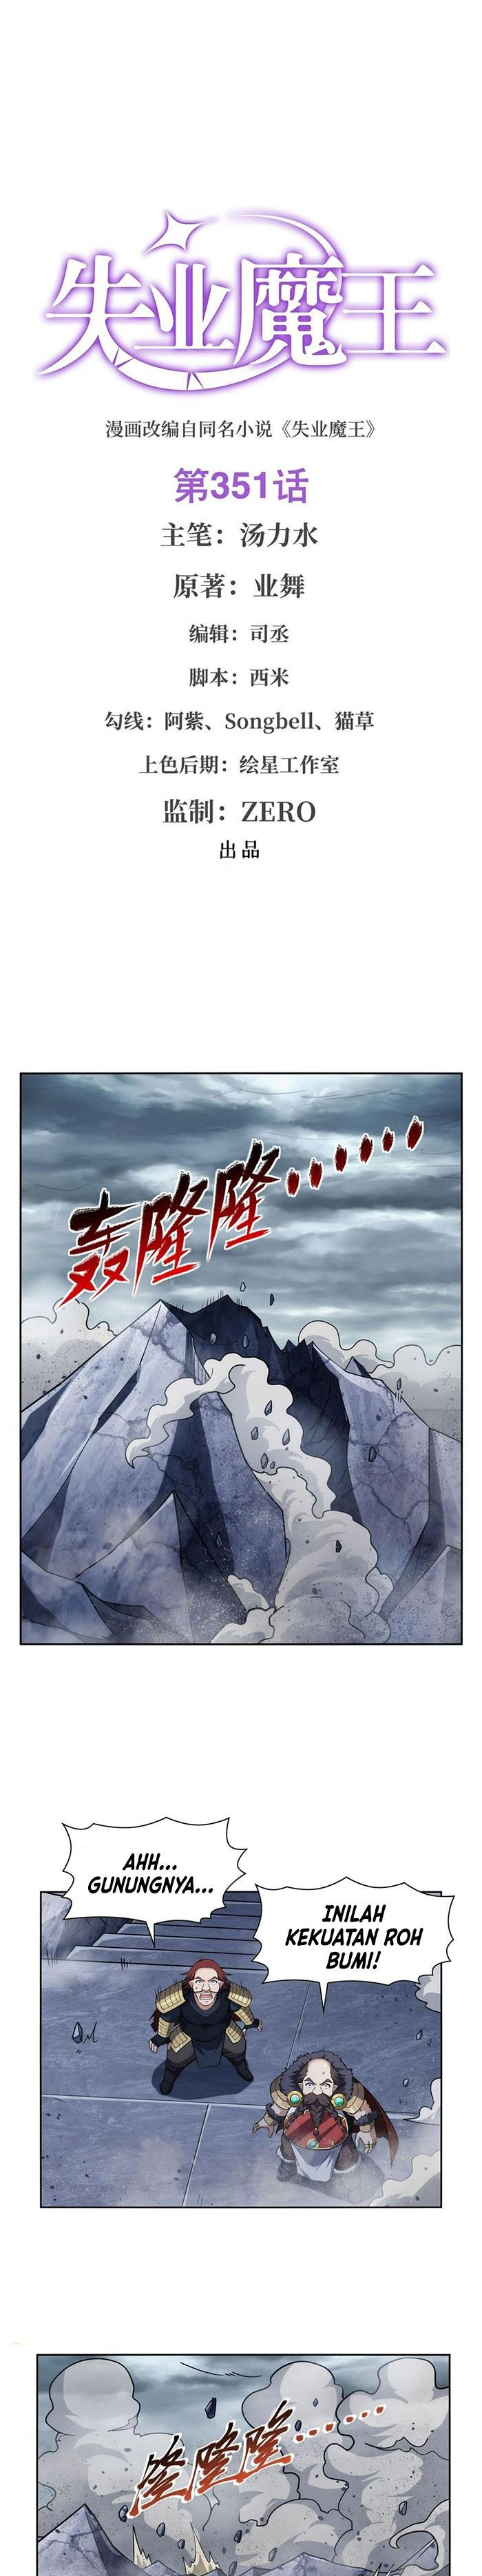 The Demon King Who Lost His Job Chapter 348